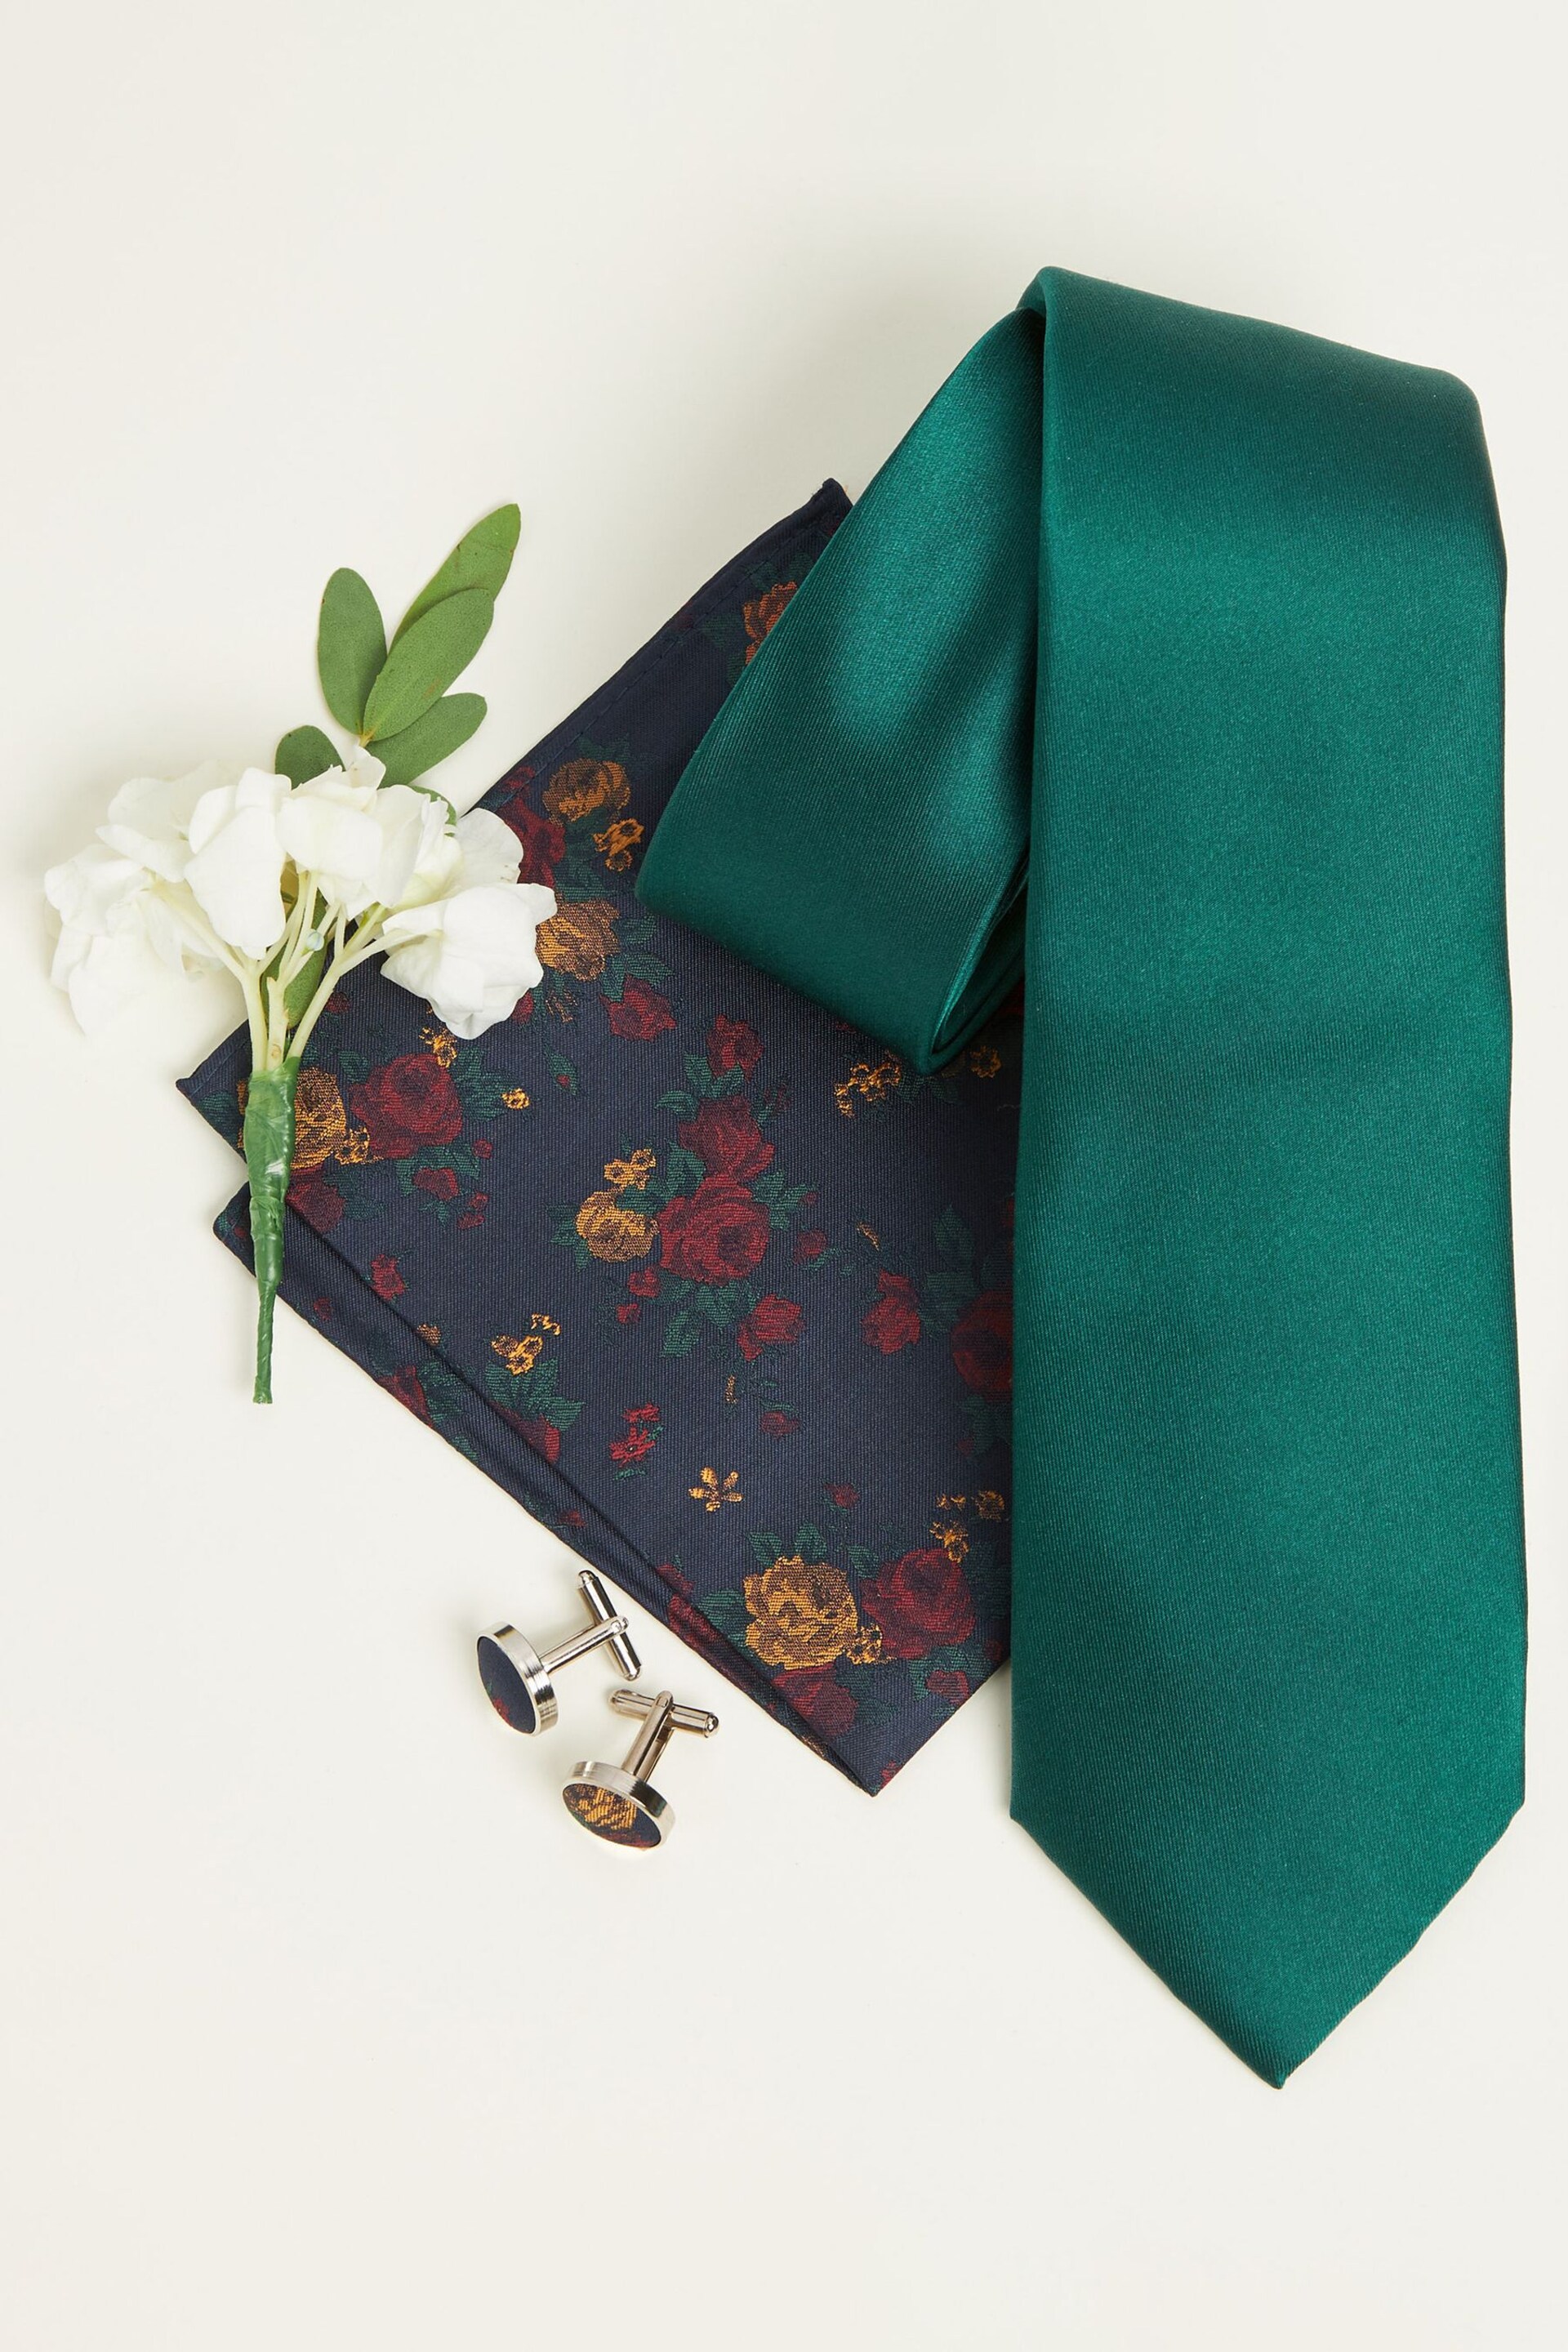 Forest Green Tie, Pocket Square and Cufflinks Gift Box Set - Image 2 of 4